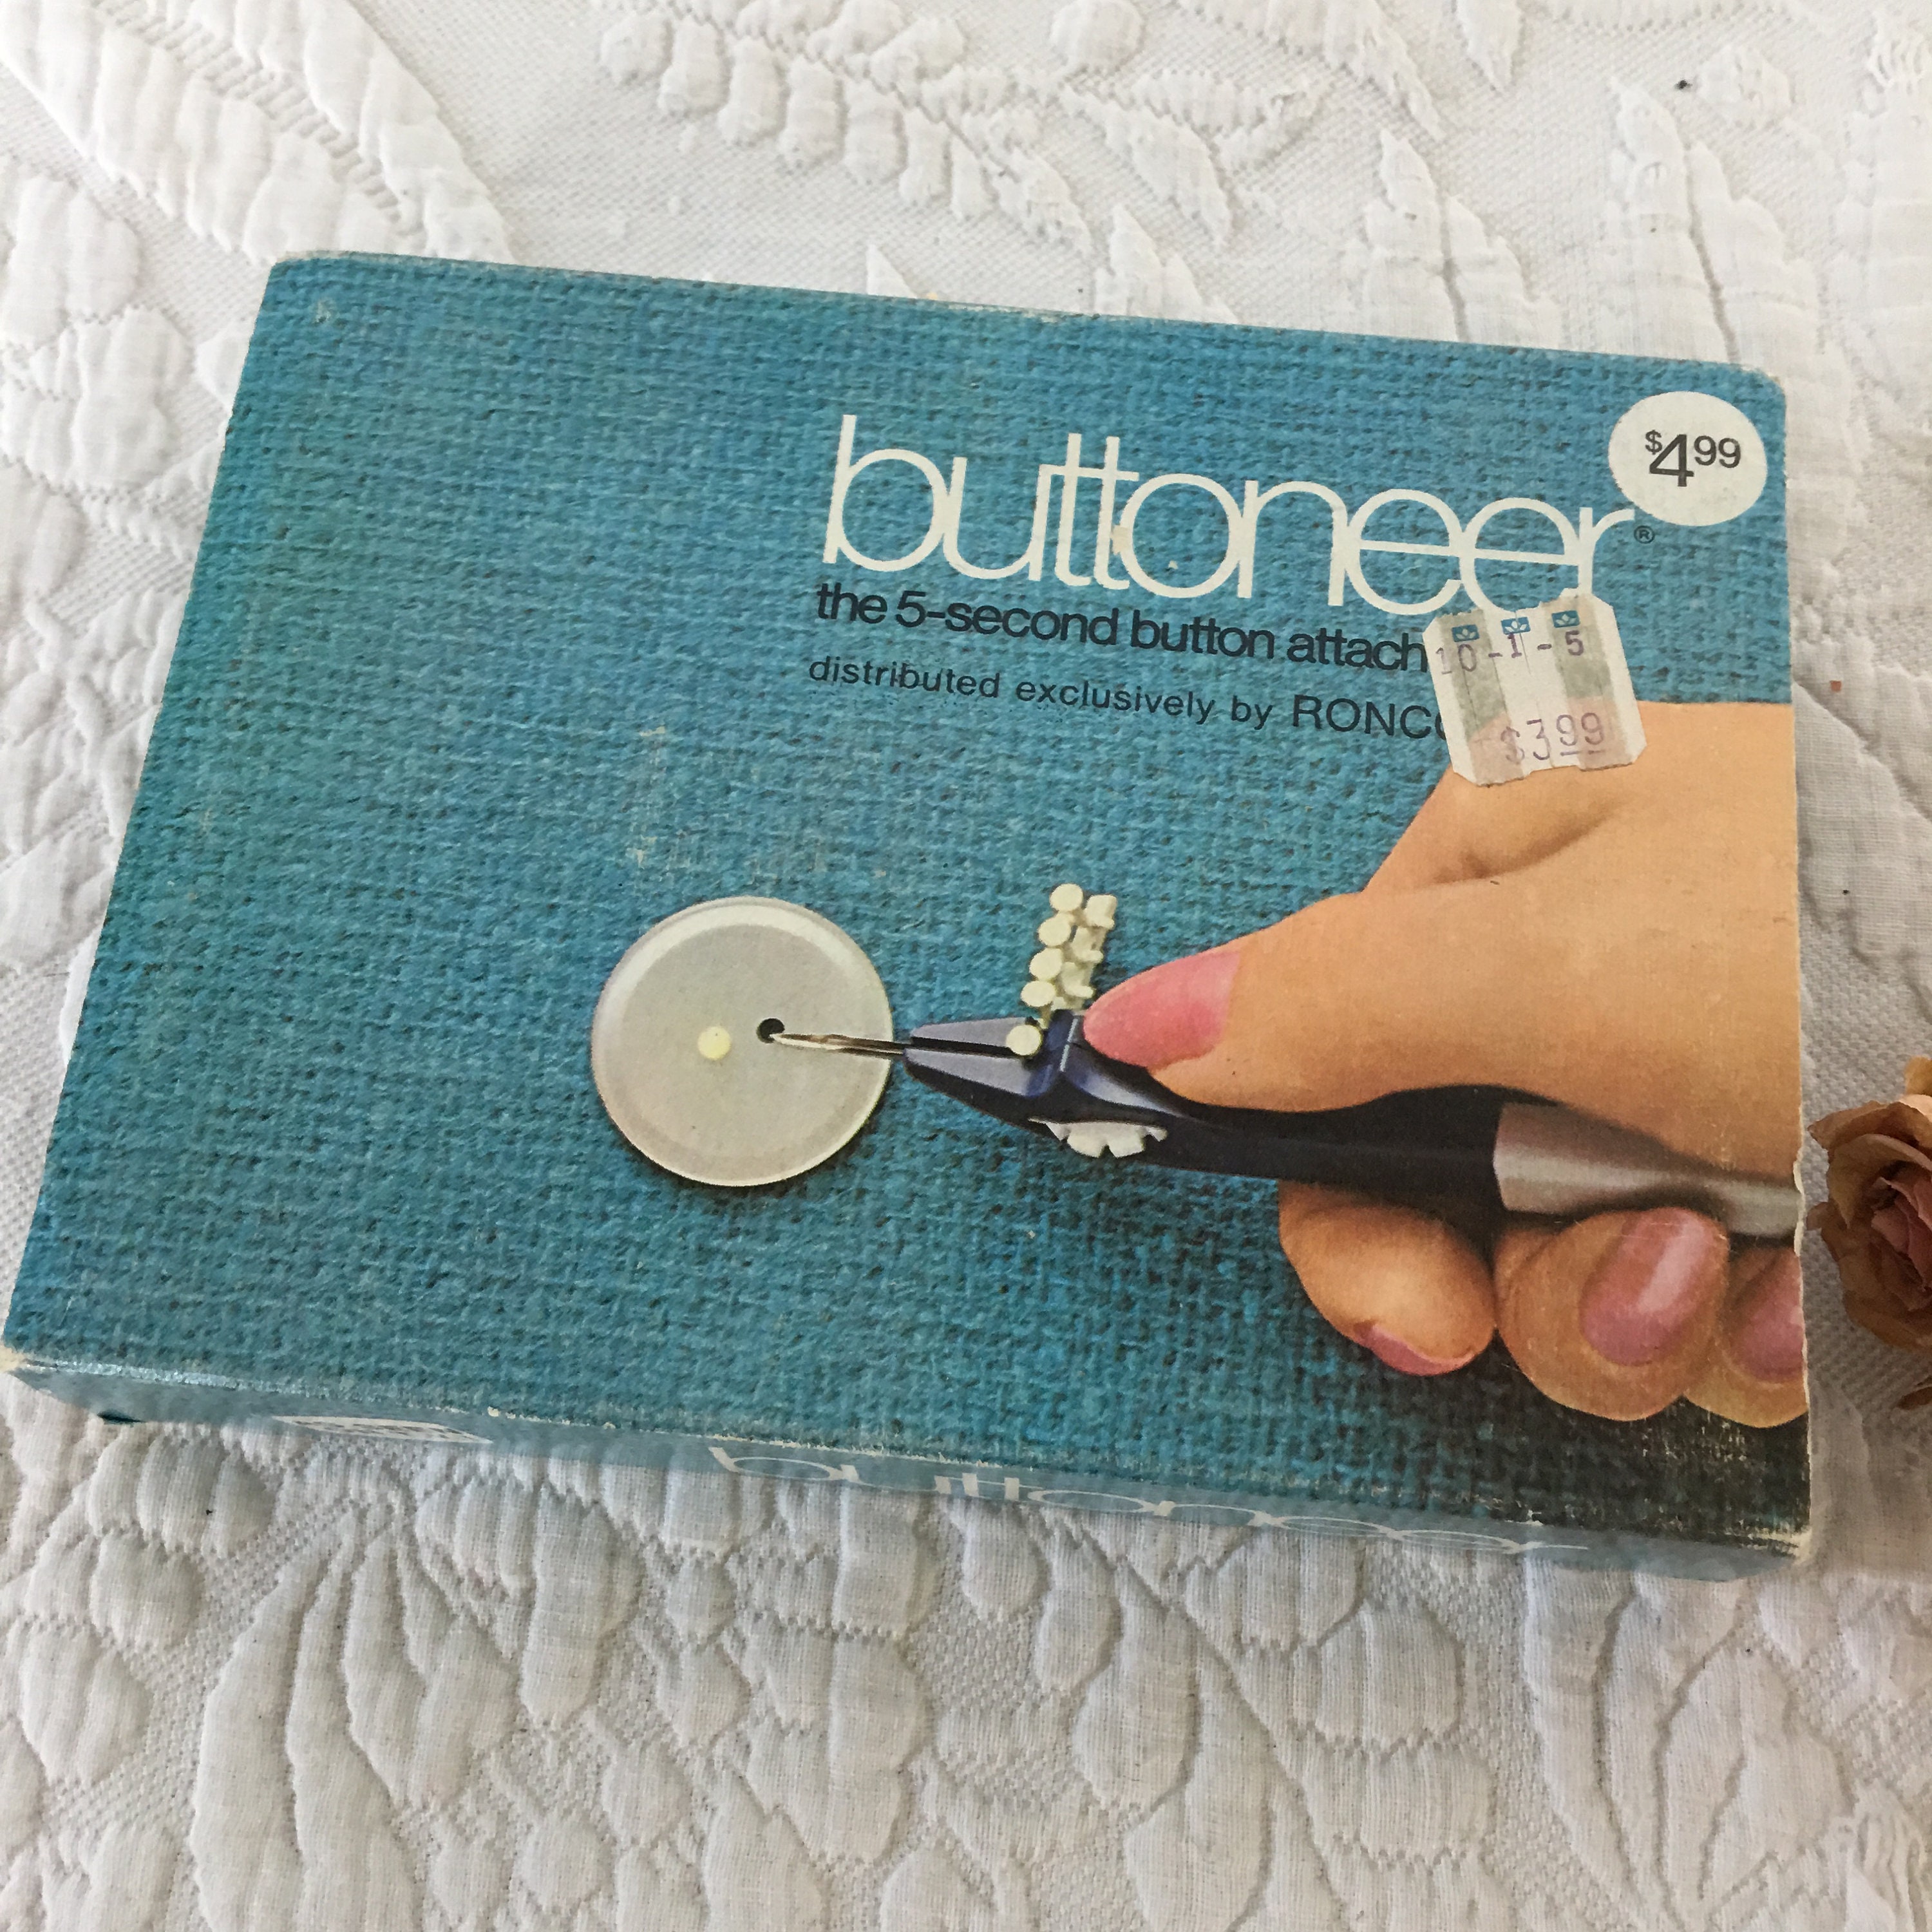 Buttoneer 5-second button attacher by Ronco